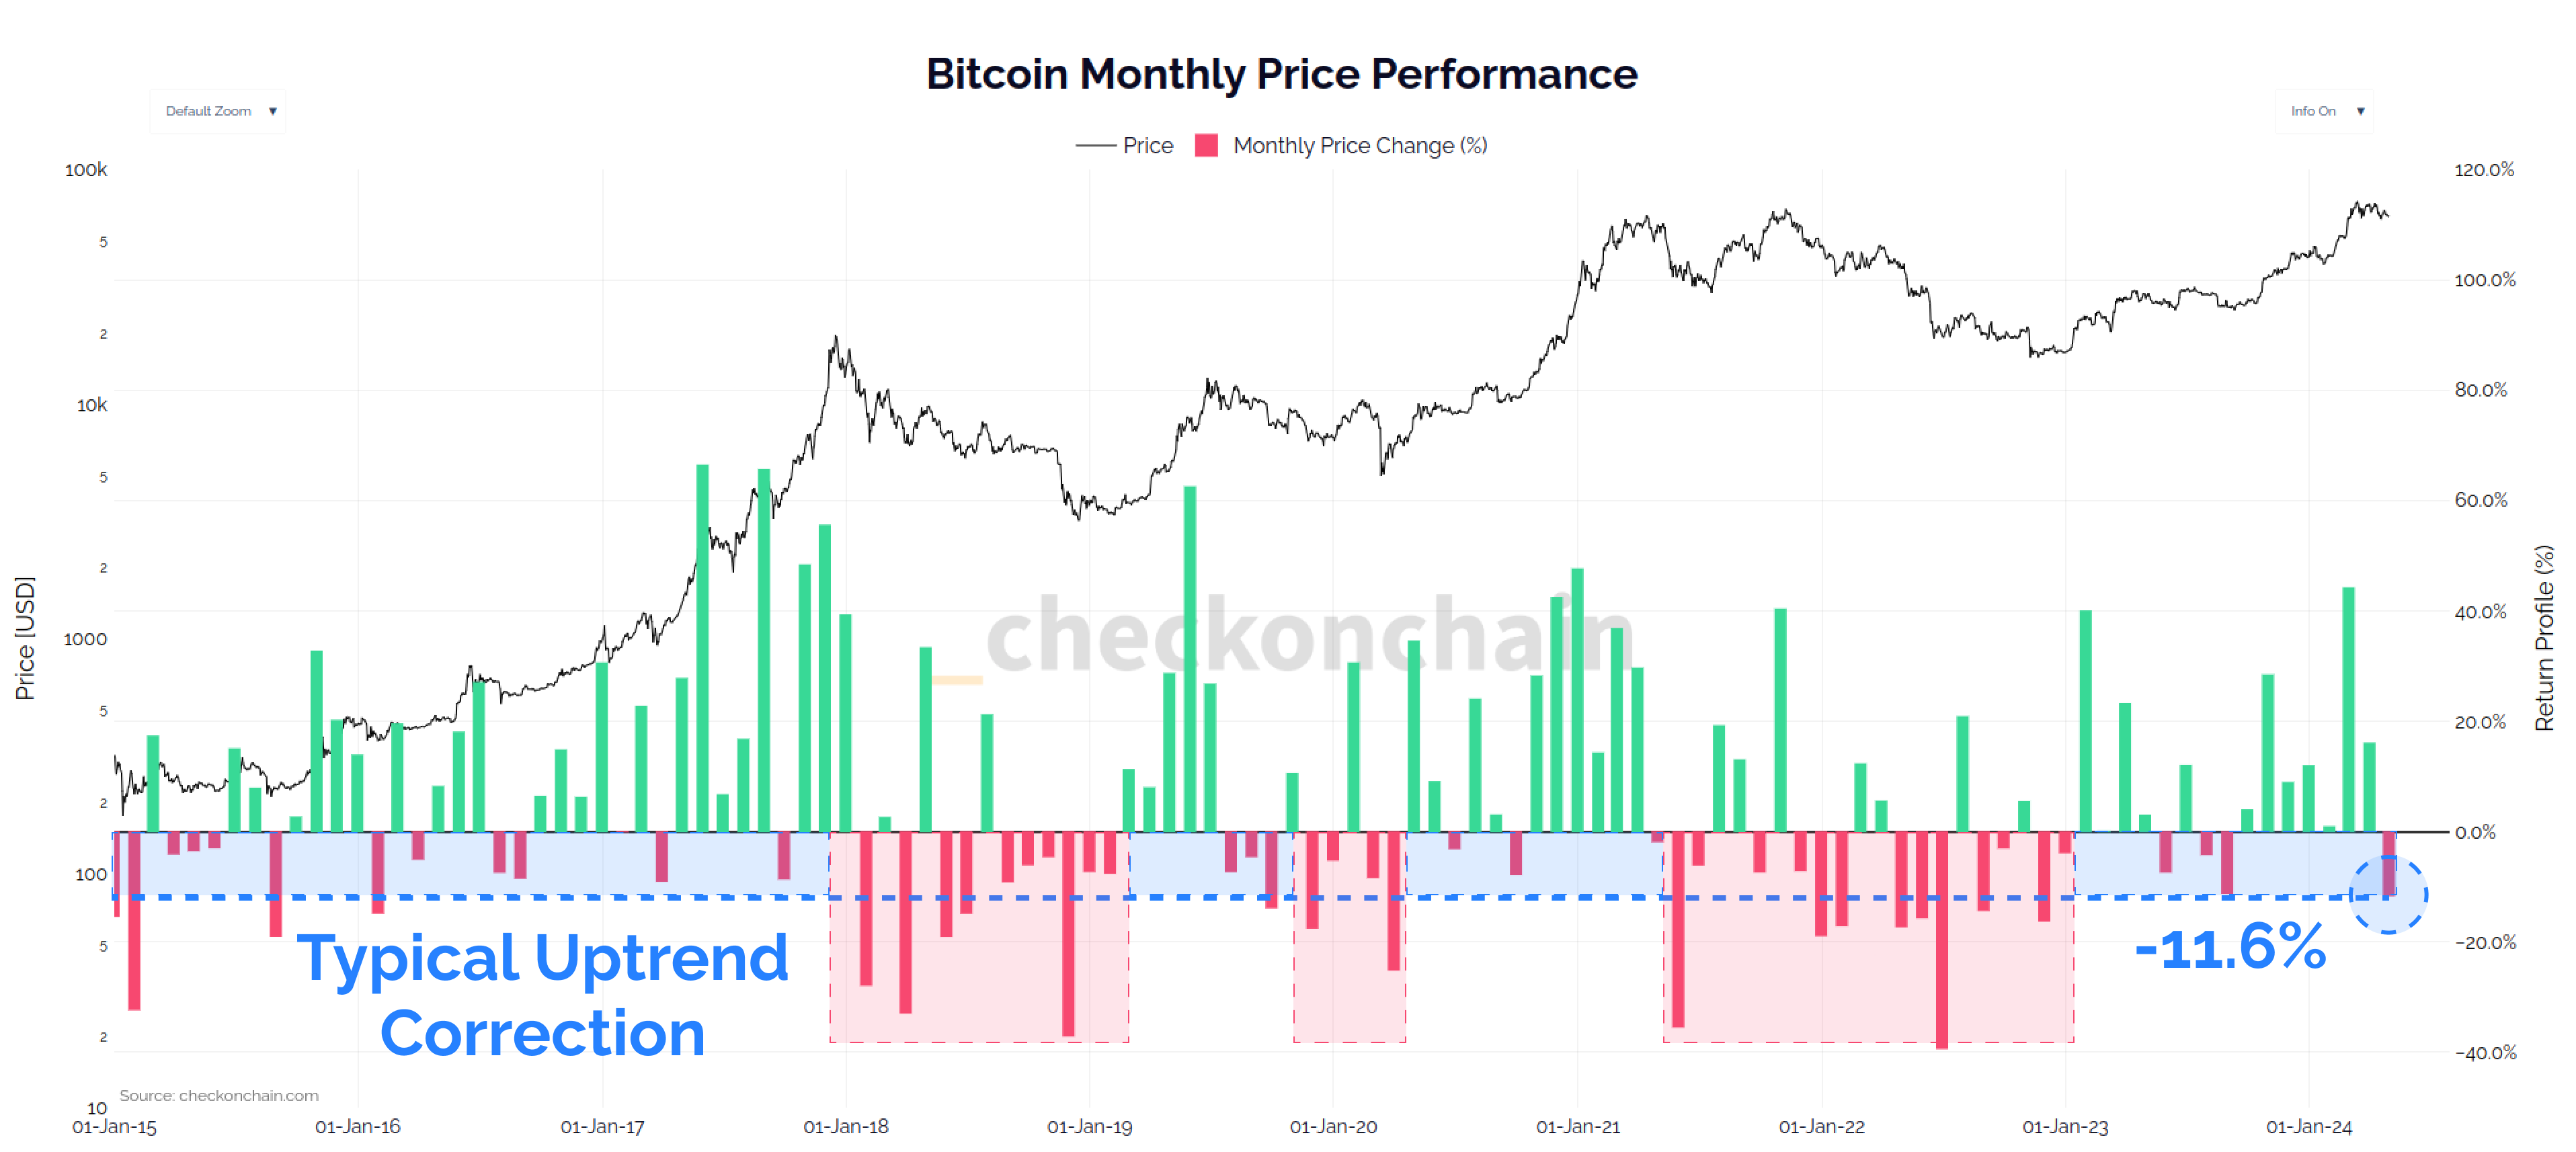 Bitcoin Monthly Price Performance